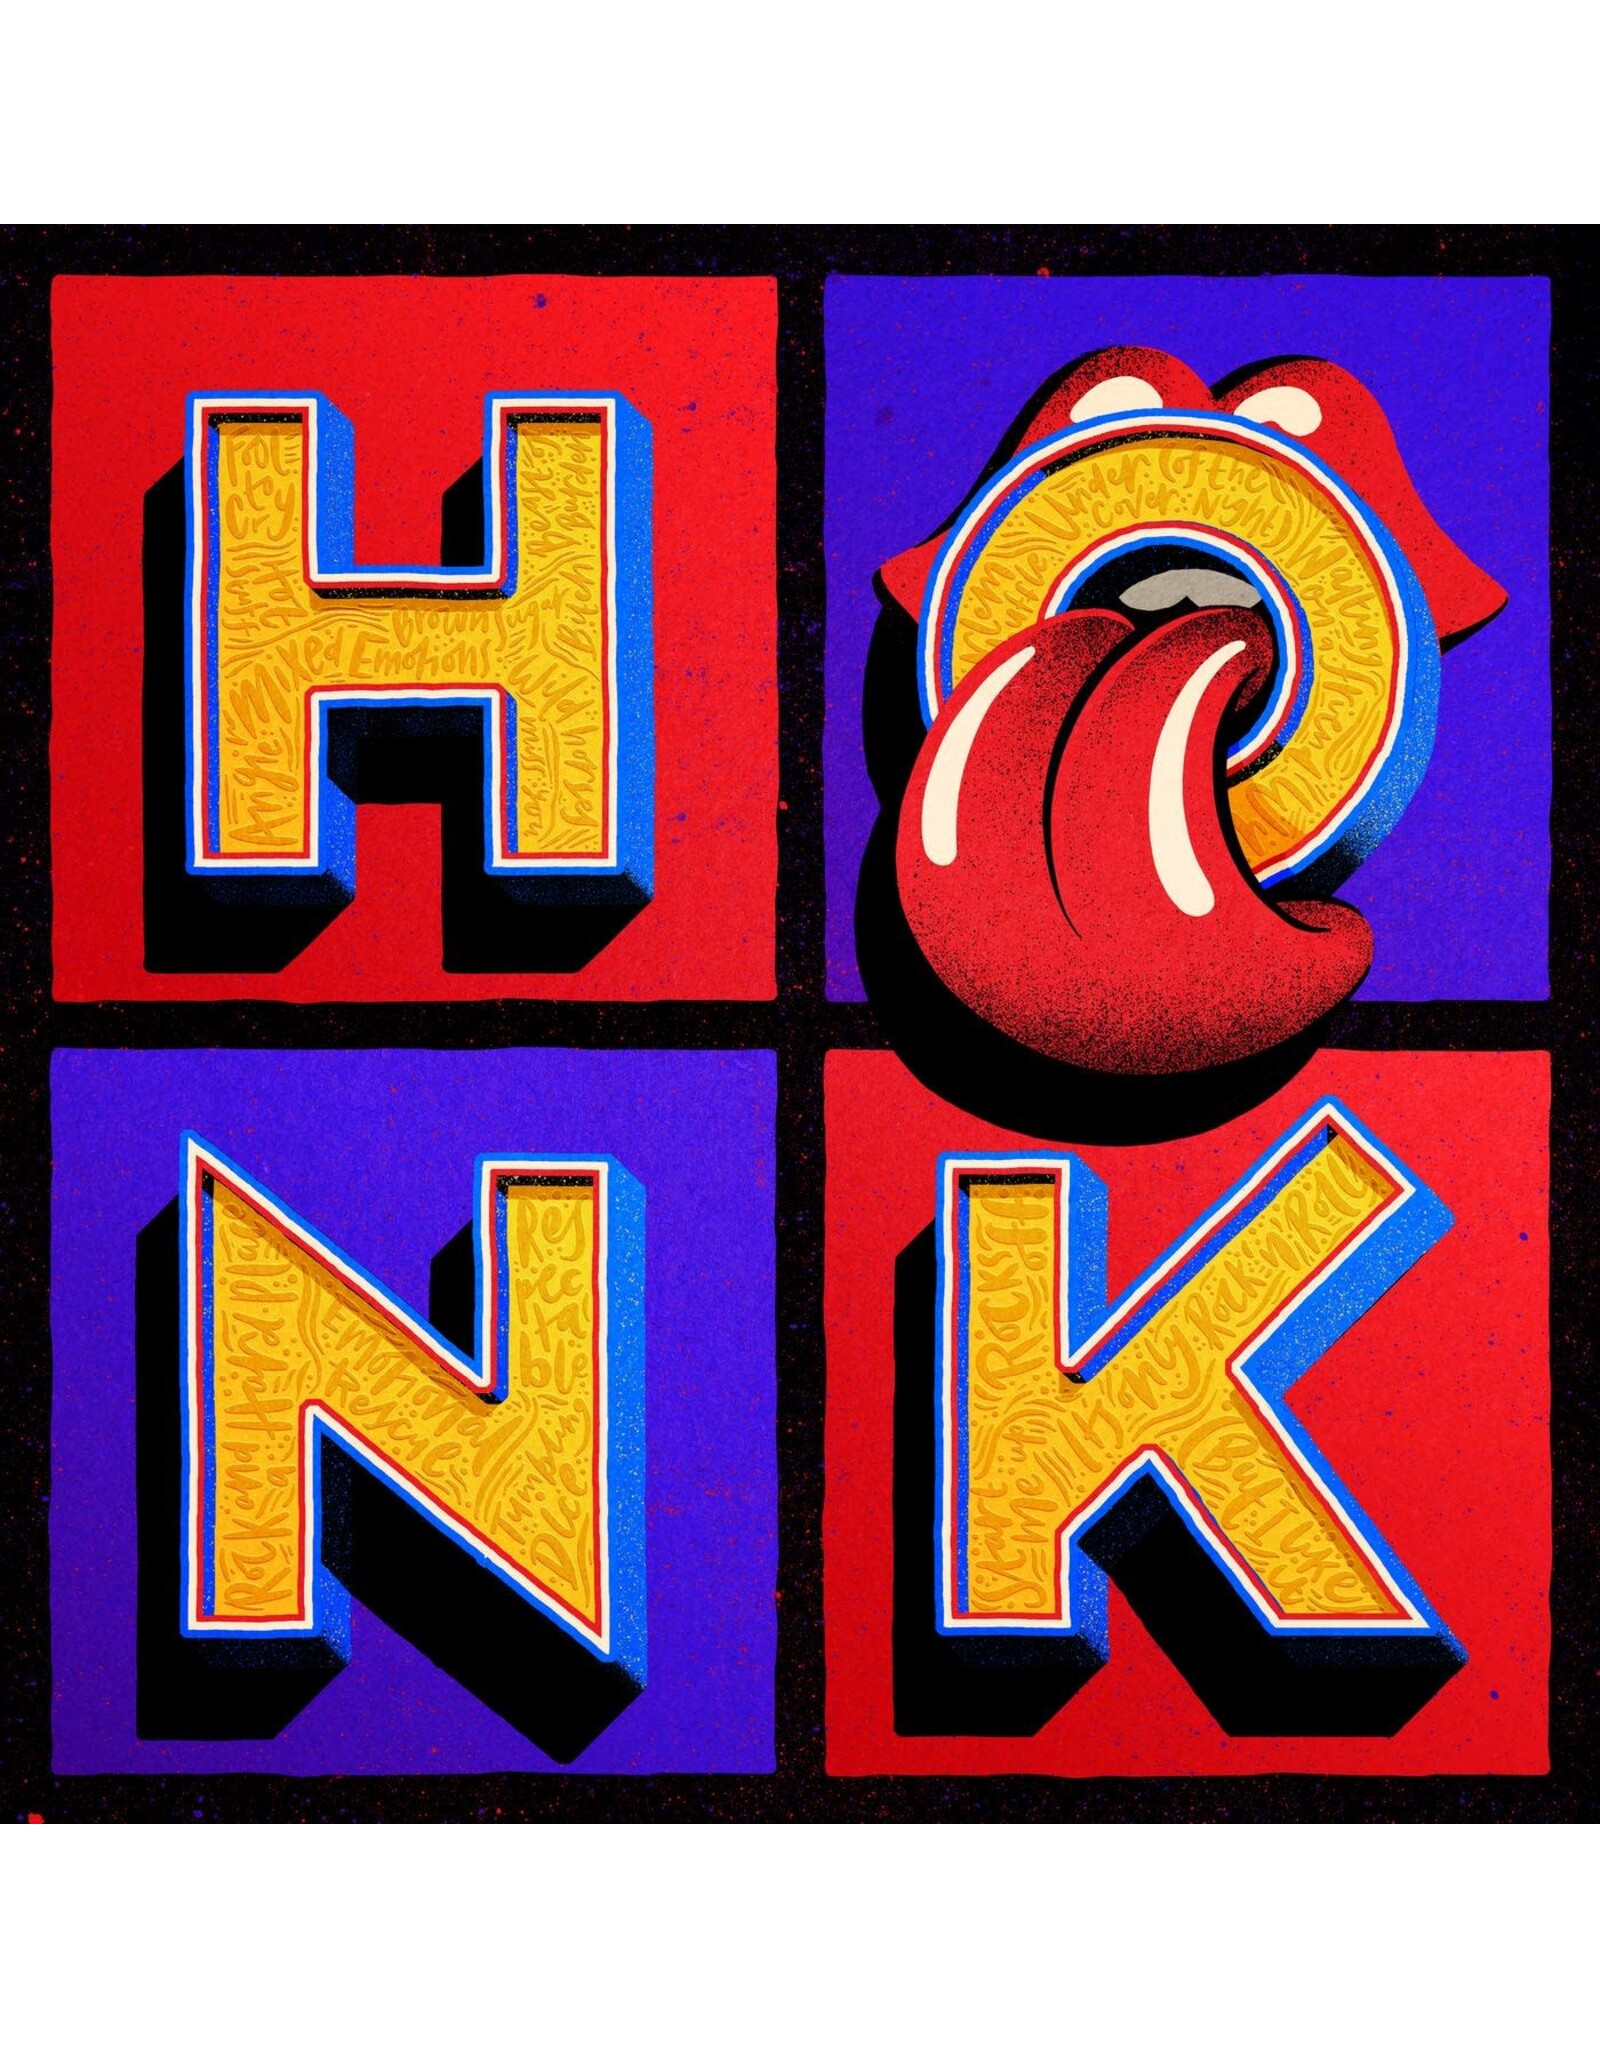 Rolling Stones - Honk (The Very Best of The Rolling Stones) [Color Vinyl]